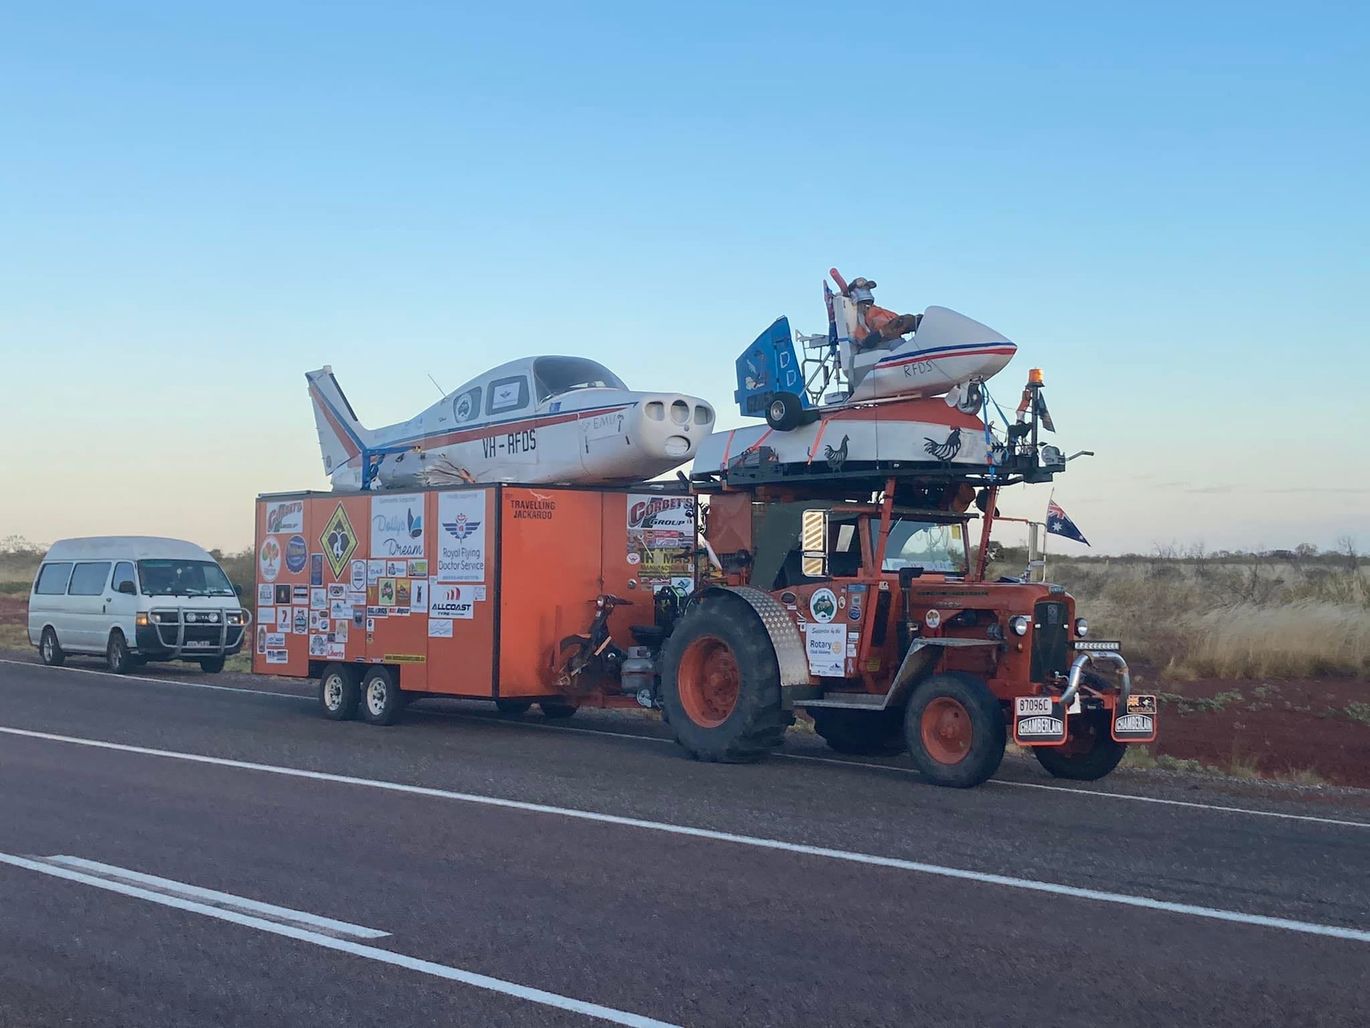 An orange tractor tows an orange box with the an aircraft replica on top.